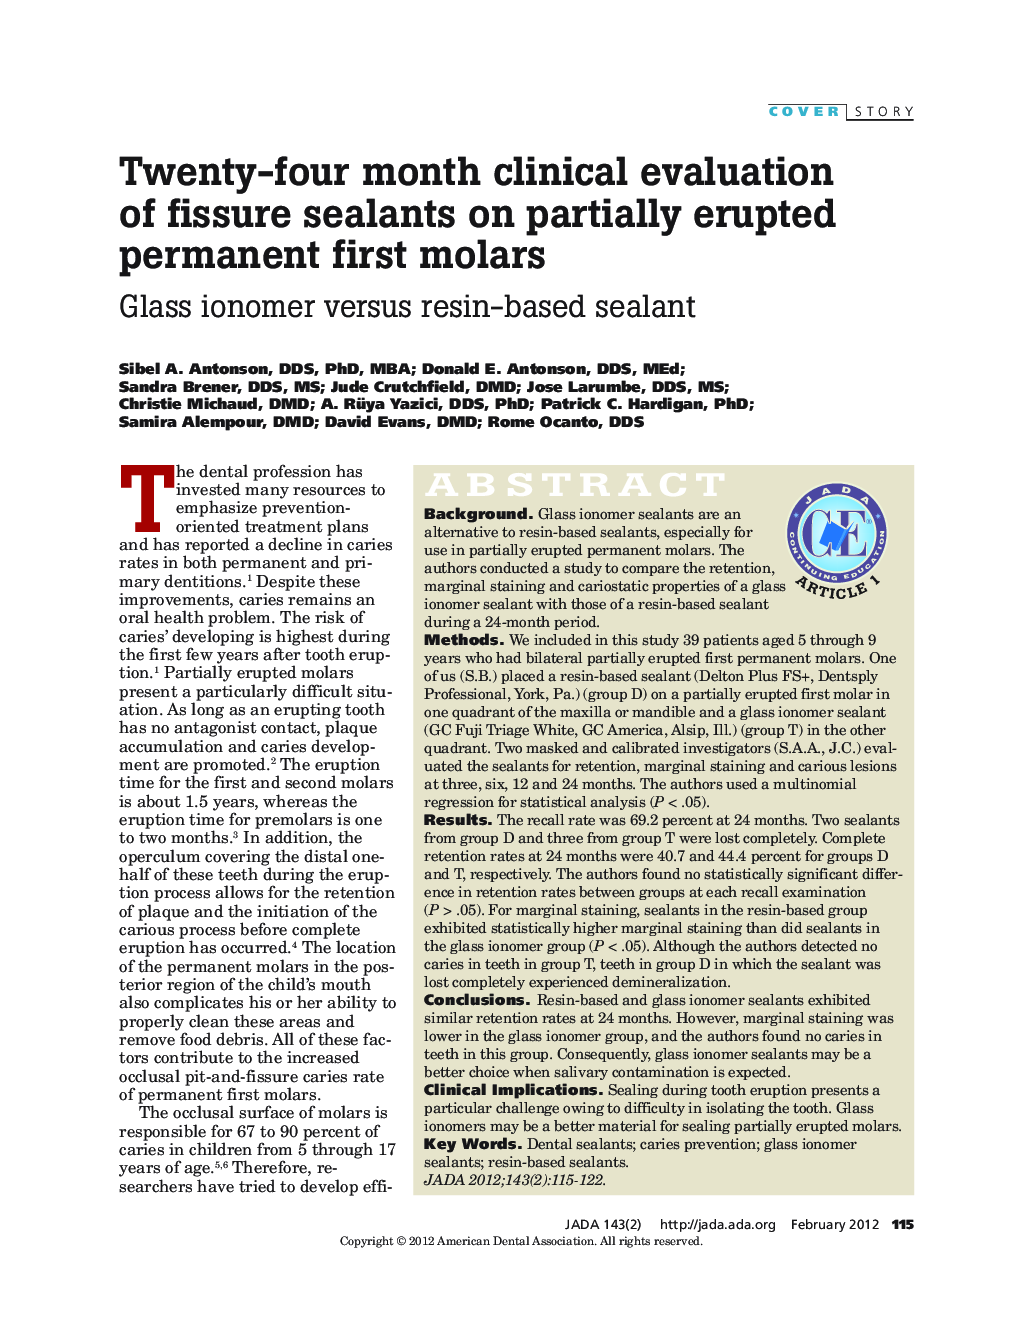 Twenty-four month clinical evaluation of fissure sealants on partially erupted permanent first molars